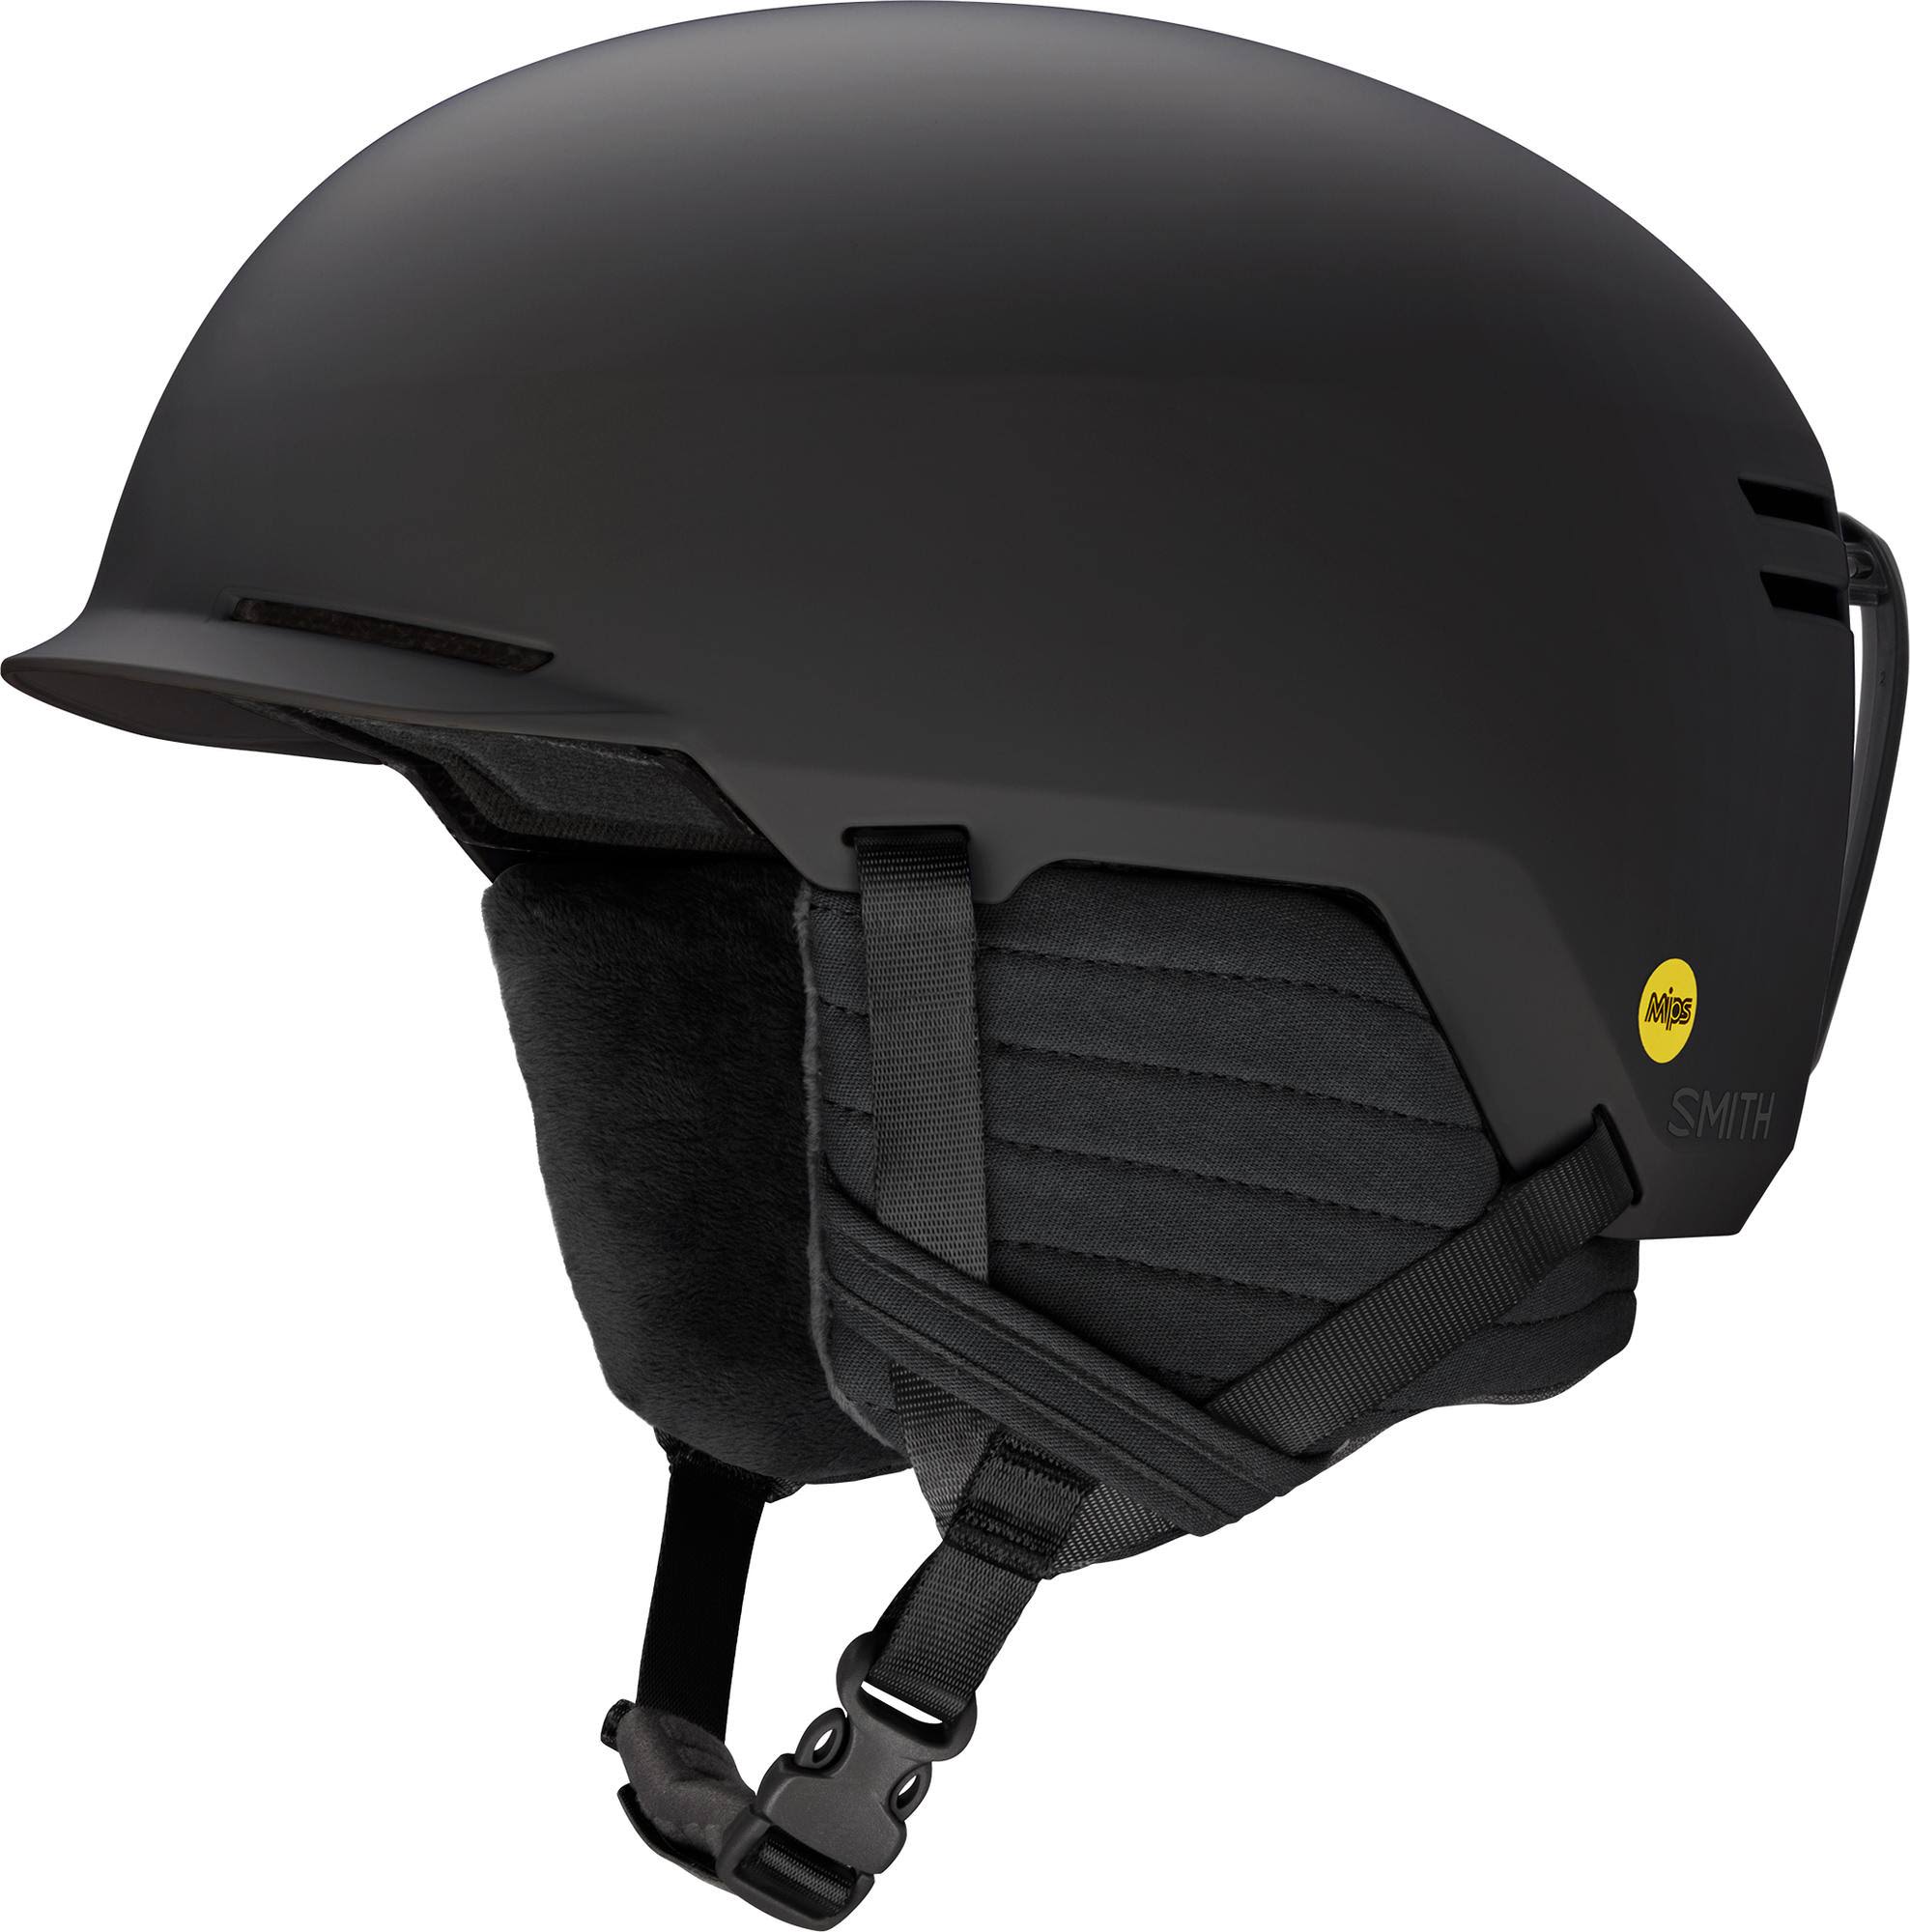 Smith Scout Mips Helmet - Black, Large